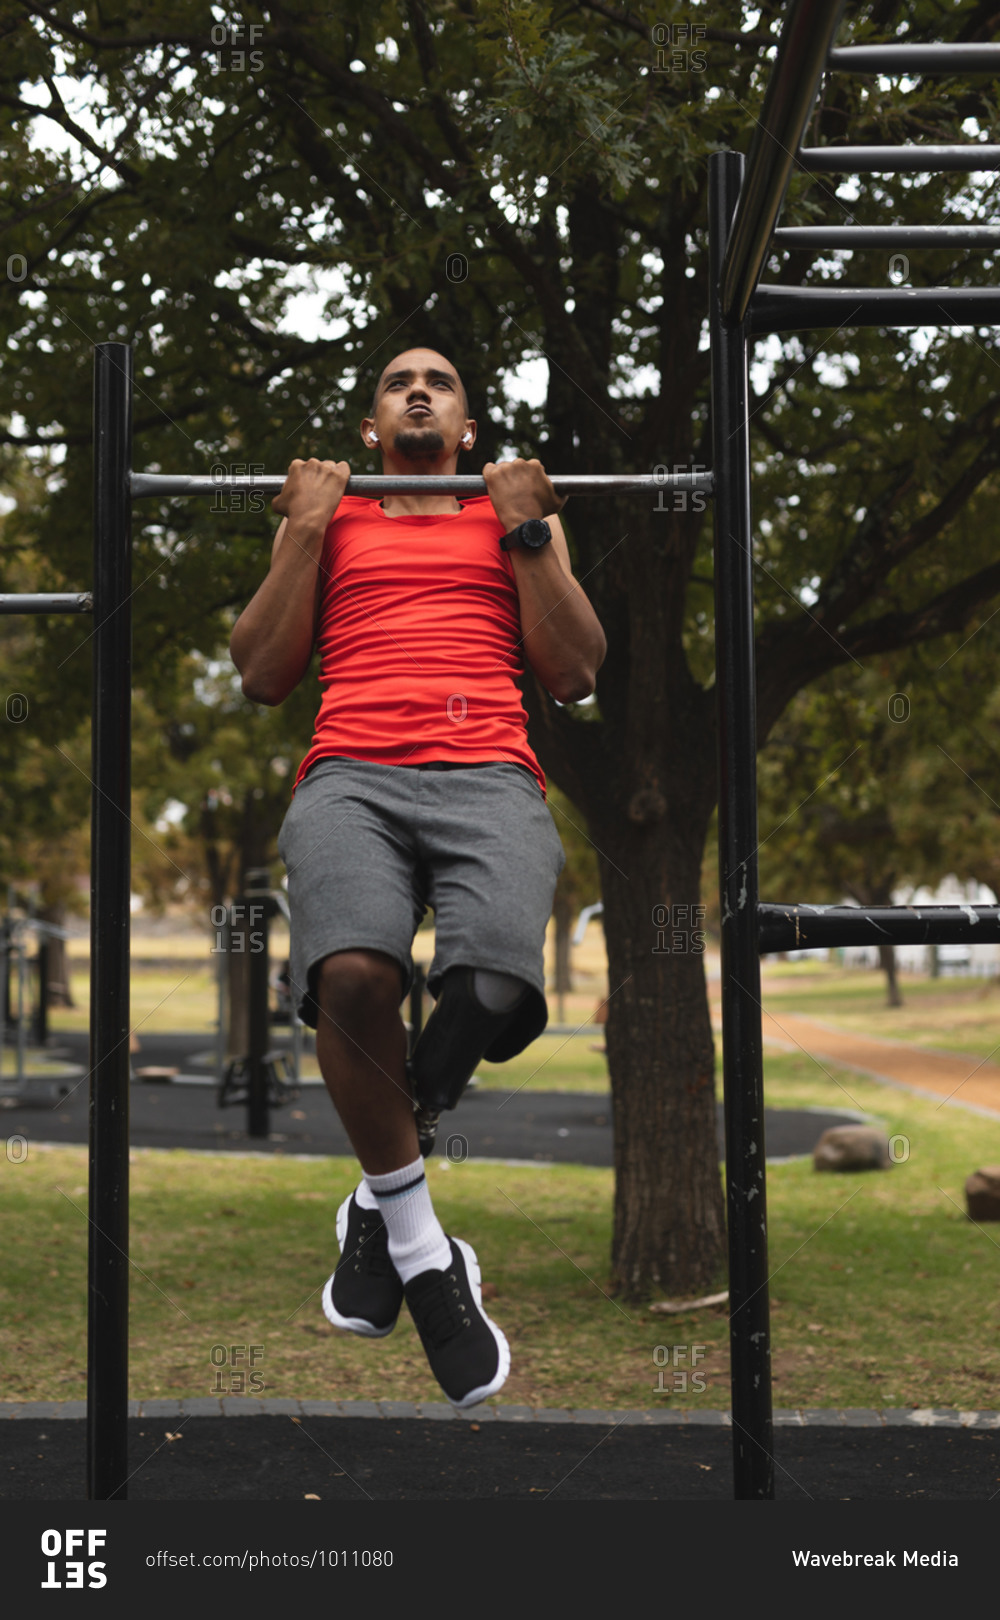 Disabled mixed race man with a prosthetic leg, working out in a park in outdoor gym, with wireless earphones on doing pull ups. Fitness disability healthy lifestyle.